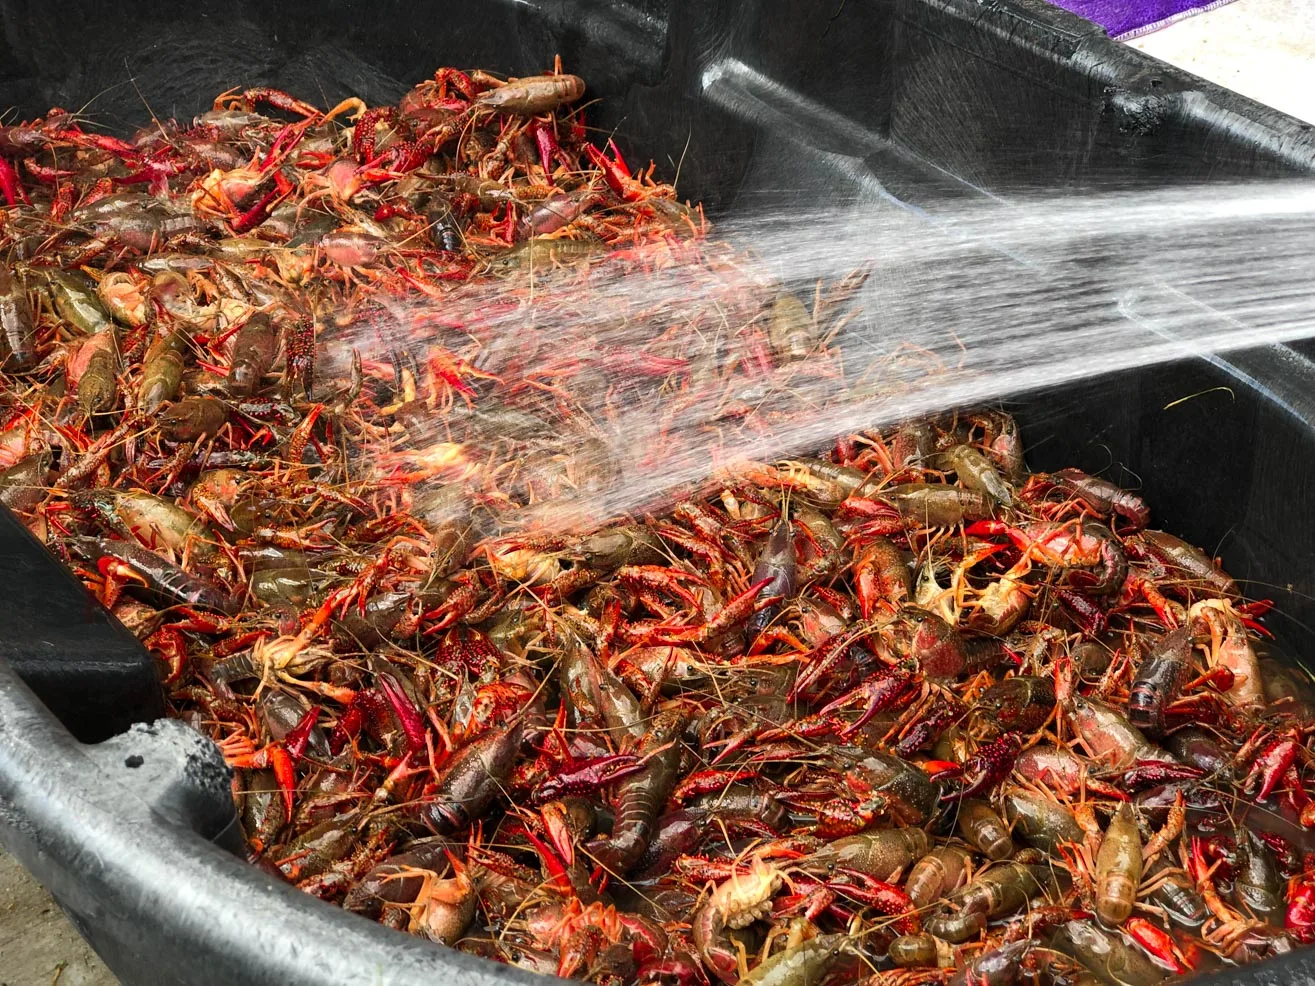 15 pounds of crawfish in a 75 gallon tub being sprayed with a water hose to clean them of mud and debris. 